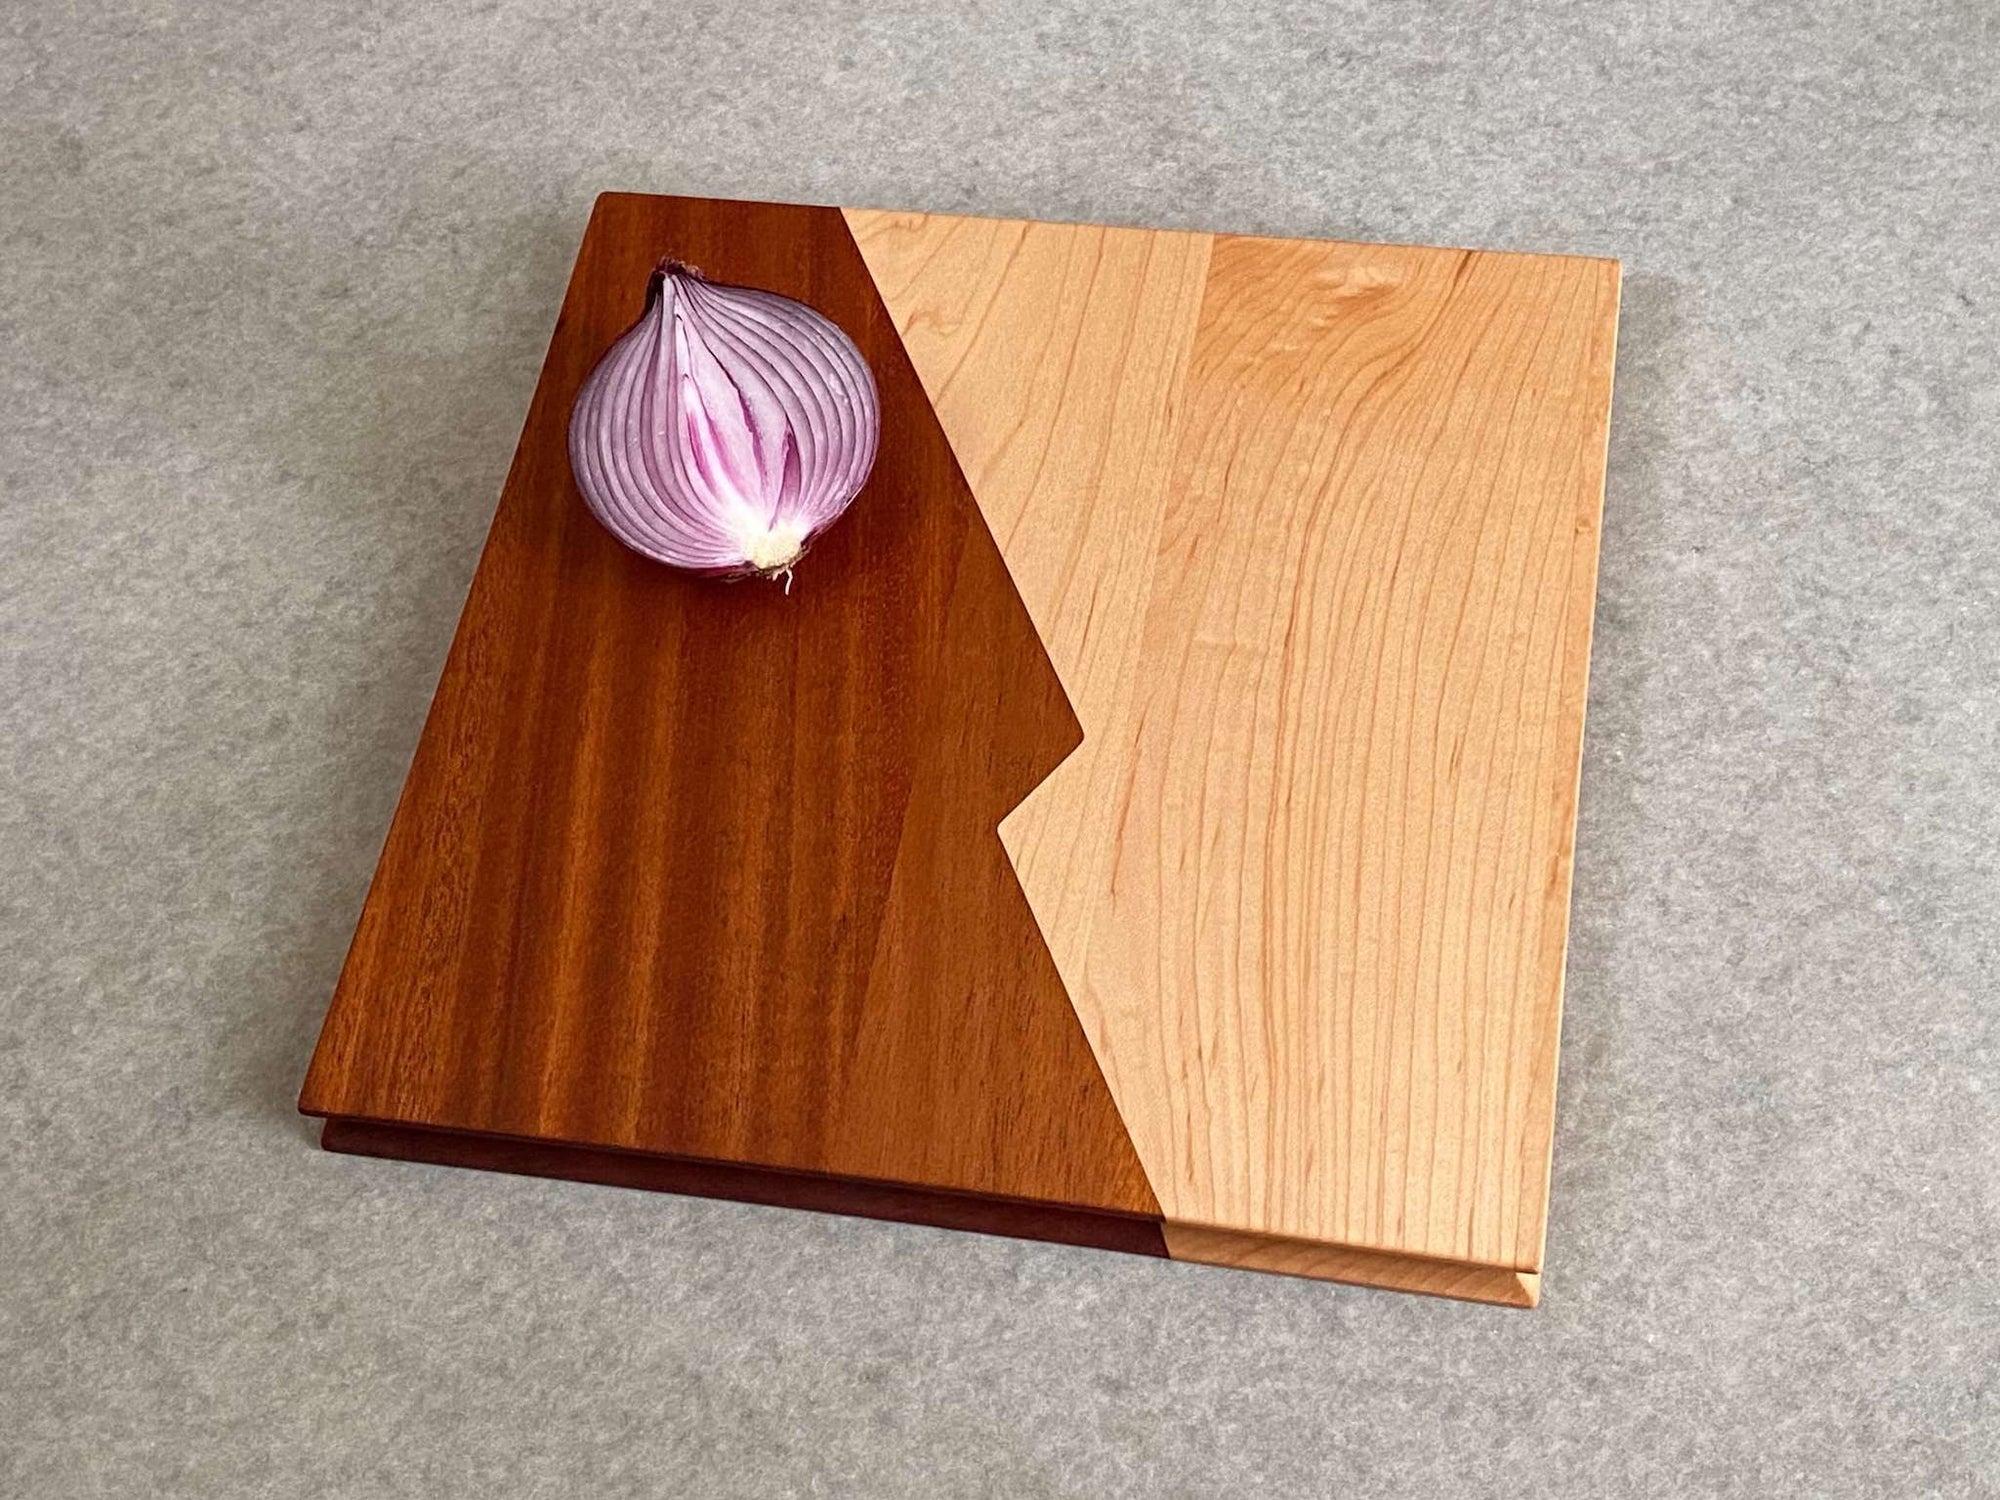 A square cutting and serving board that is half maple and half mahogany with a zigzag center joint. Sculpted edges provide comfortable fingerholds.